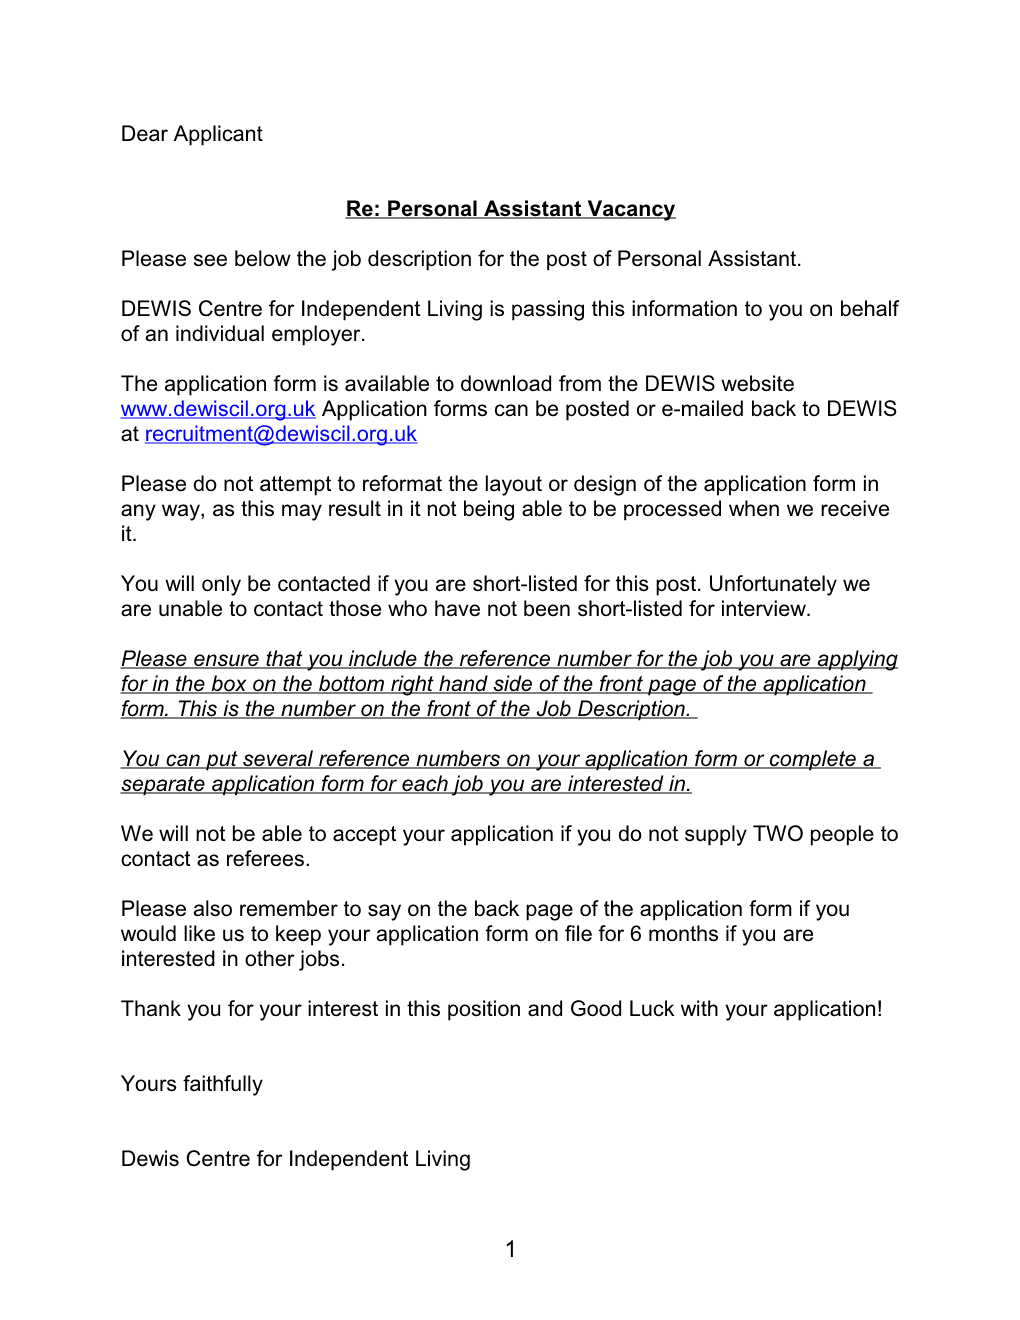 Re: Personal Assistant Vacancy